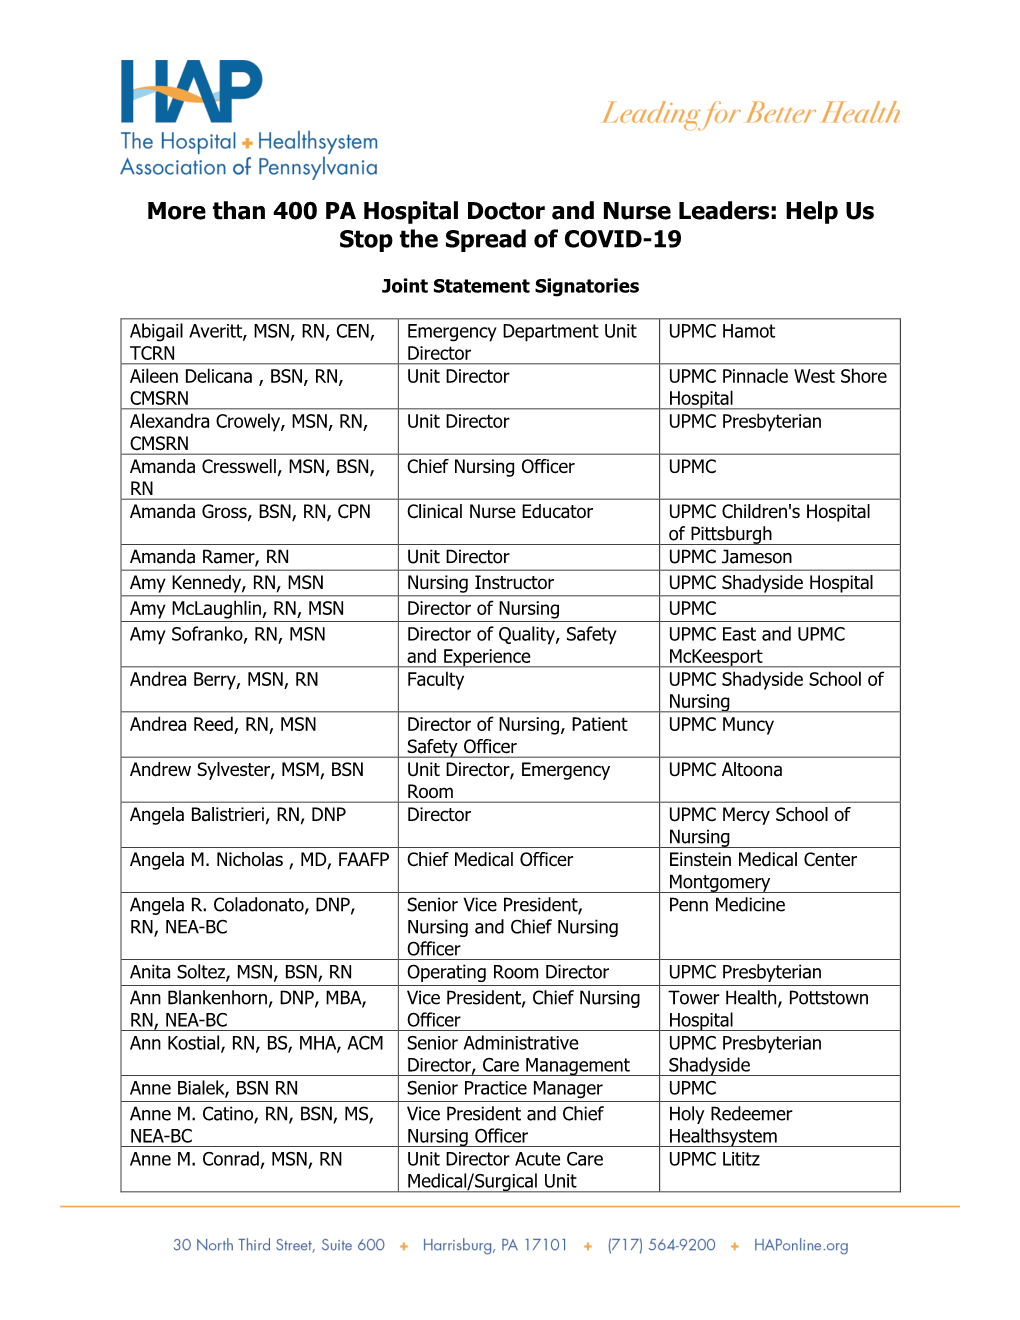 More Than 400 PA Hospital Doctor and Nurse Leaders: Help Us Stop the Spread of COVID-19